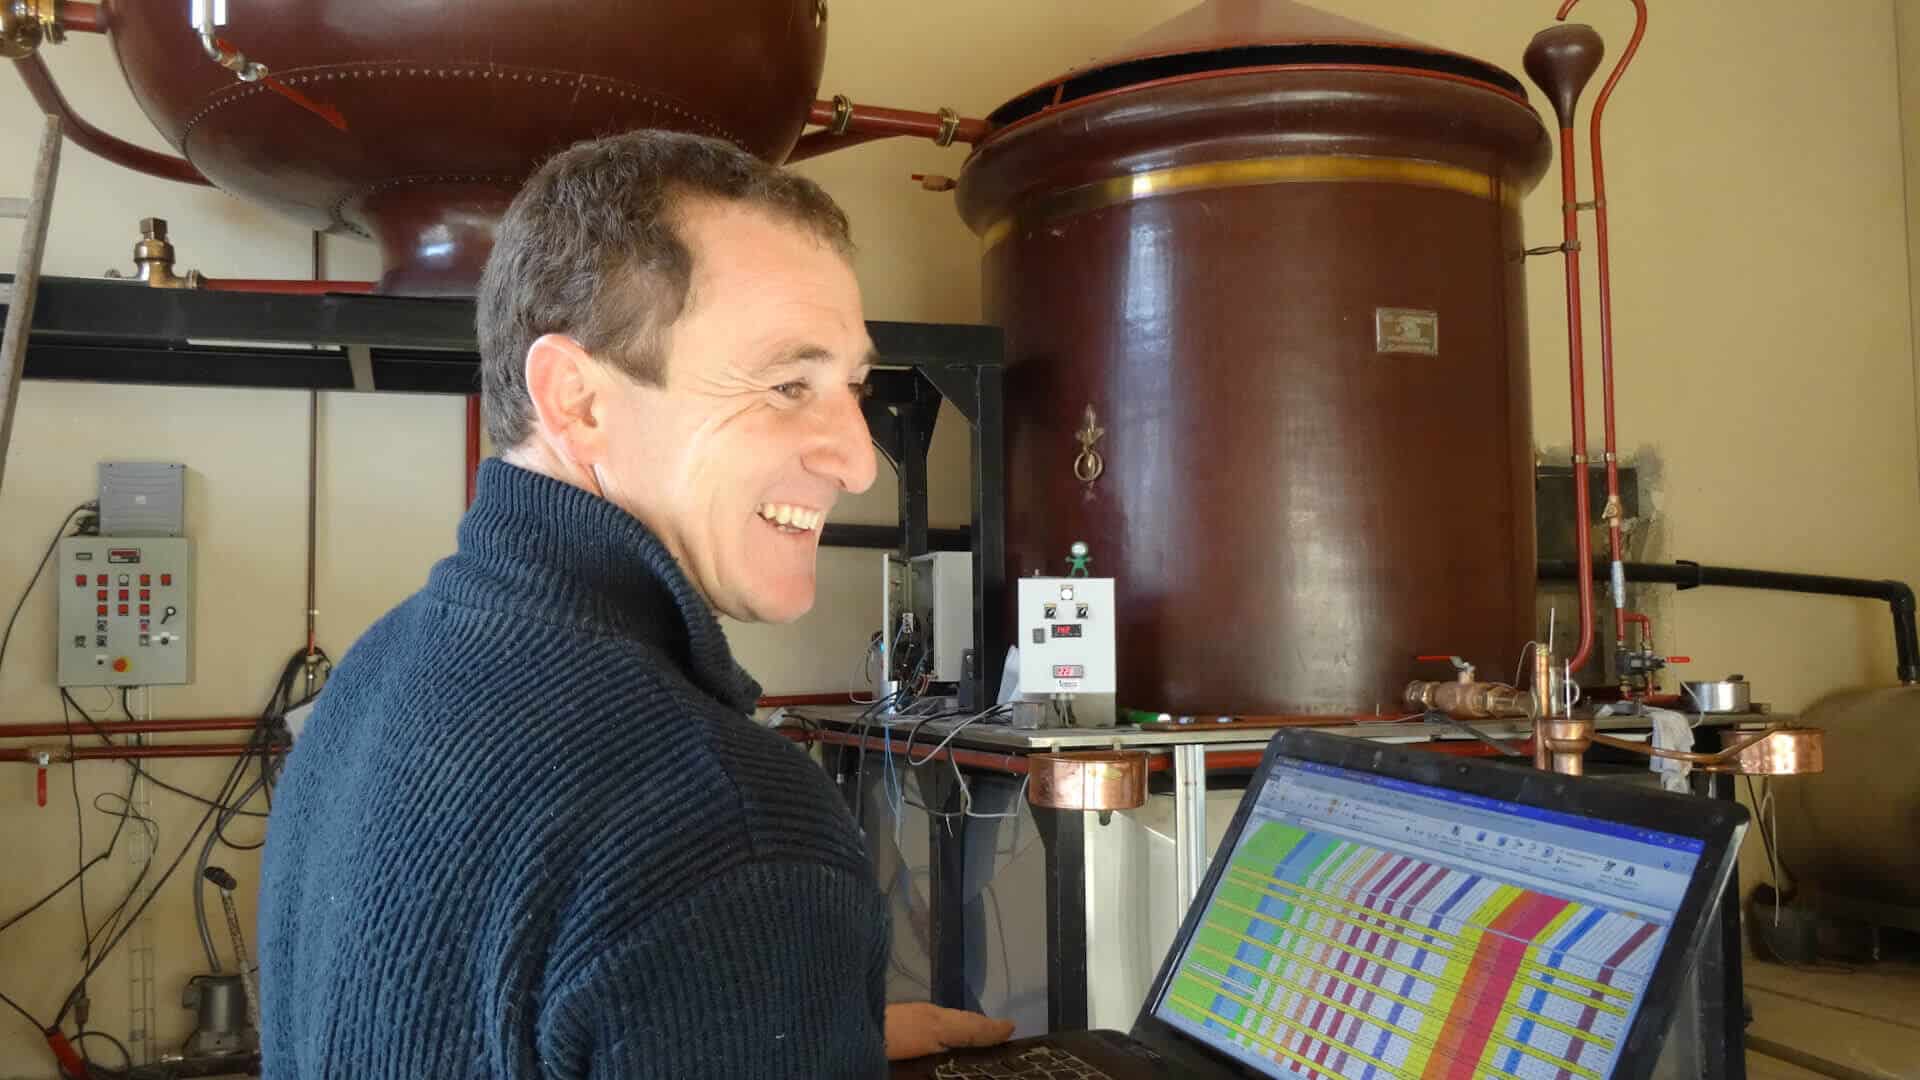 The distiller is now helped by a computer monitoring the pot still